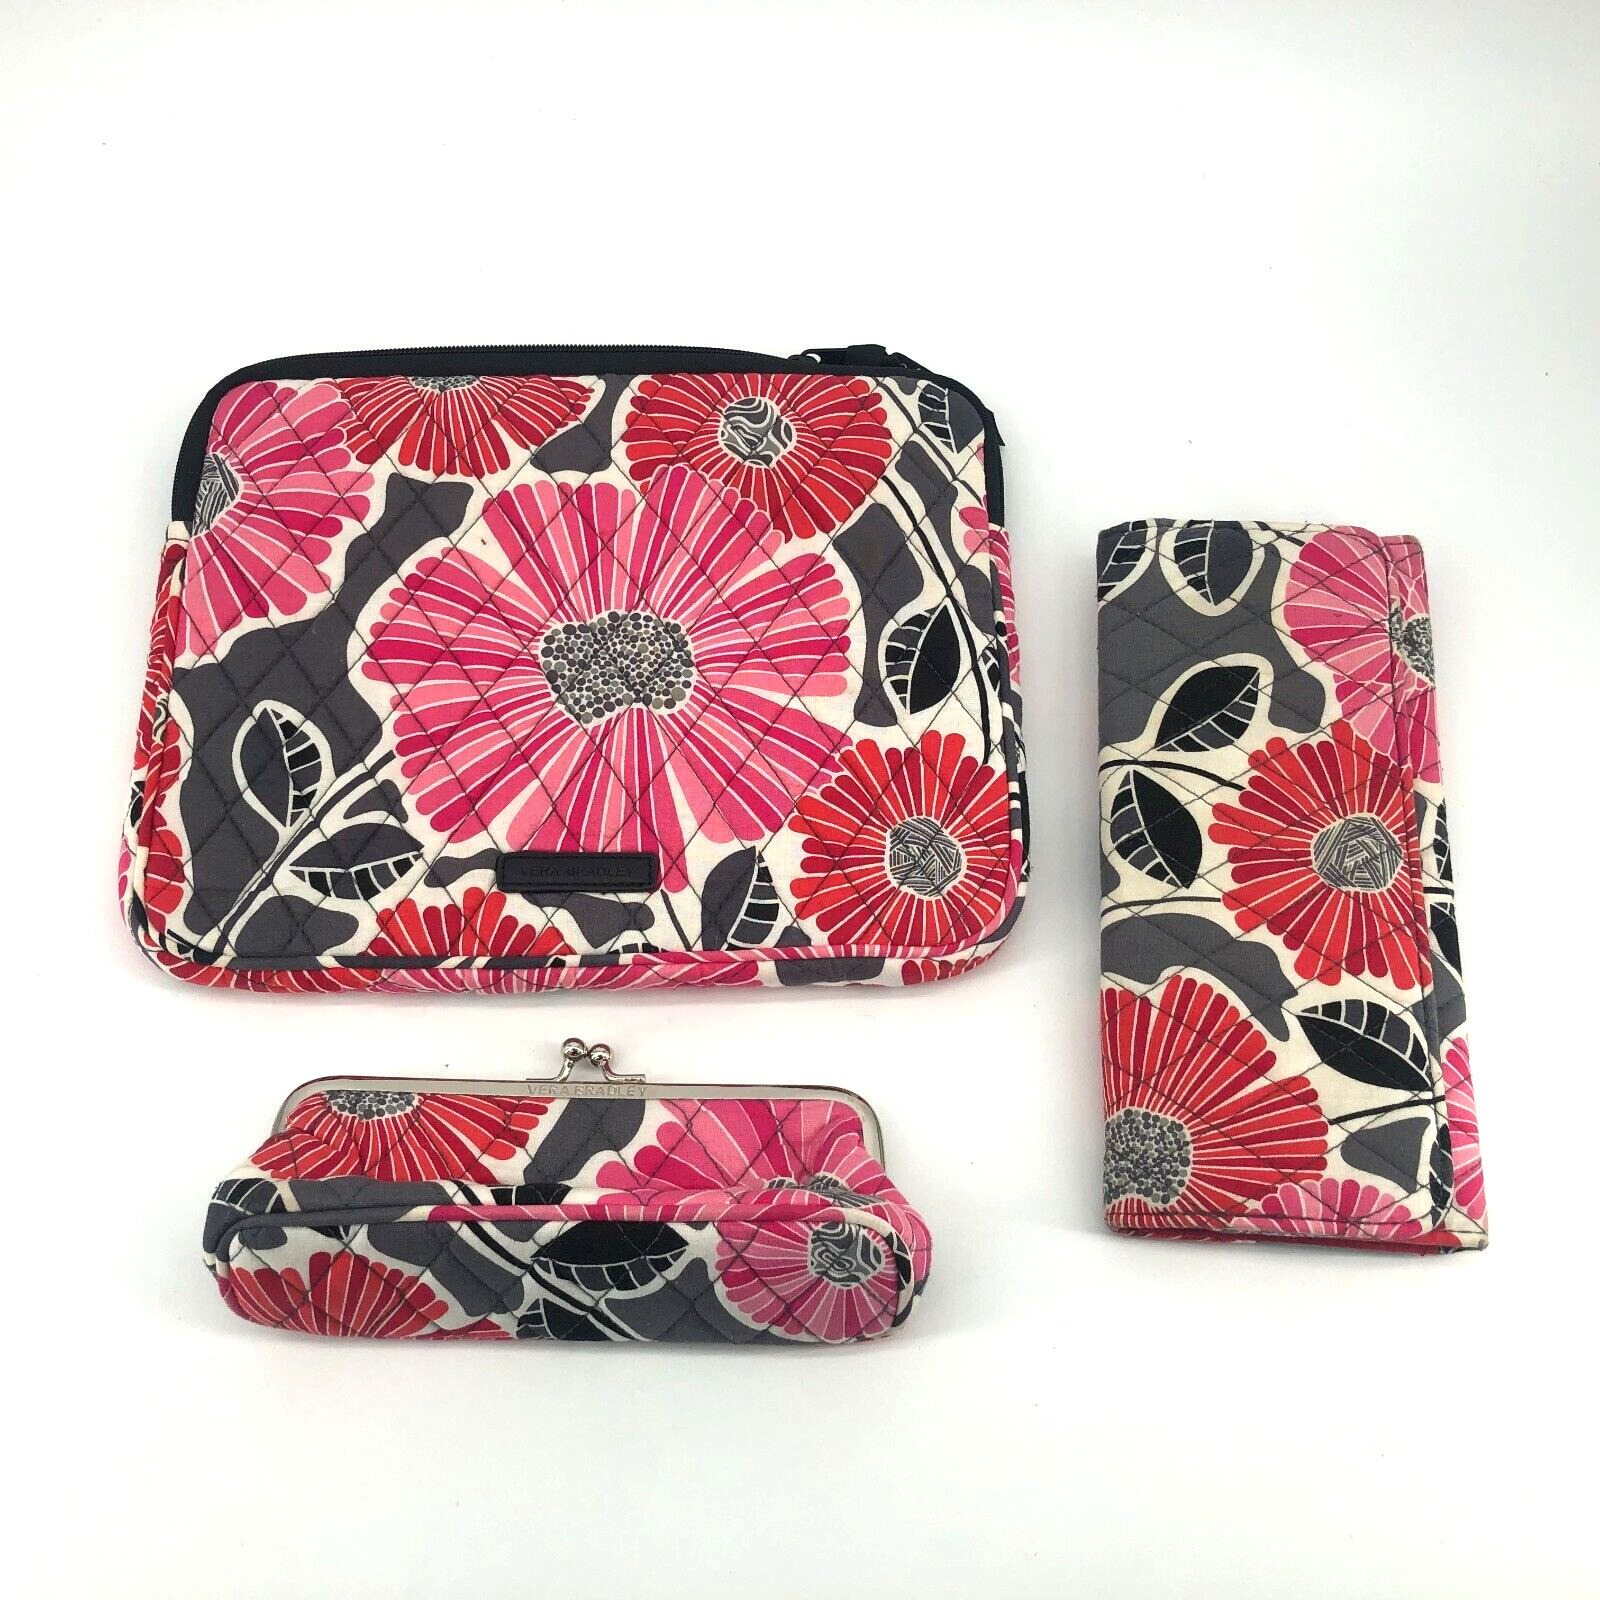 Vera Bradley Pink Tablet Sleeve, Small pouch, Trifold Wallet in Cheery Blossoms